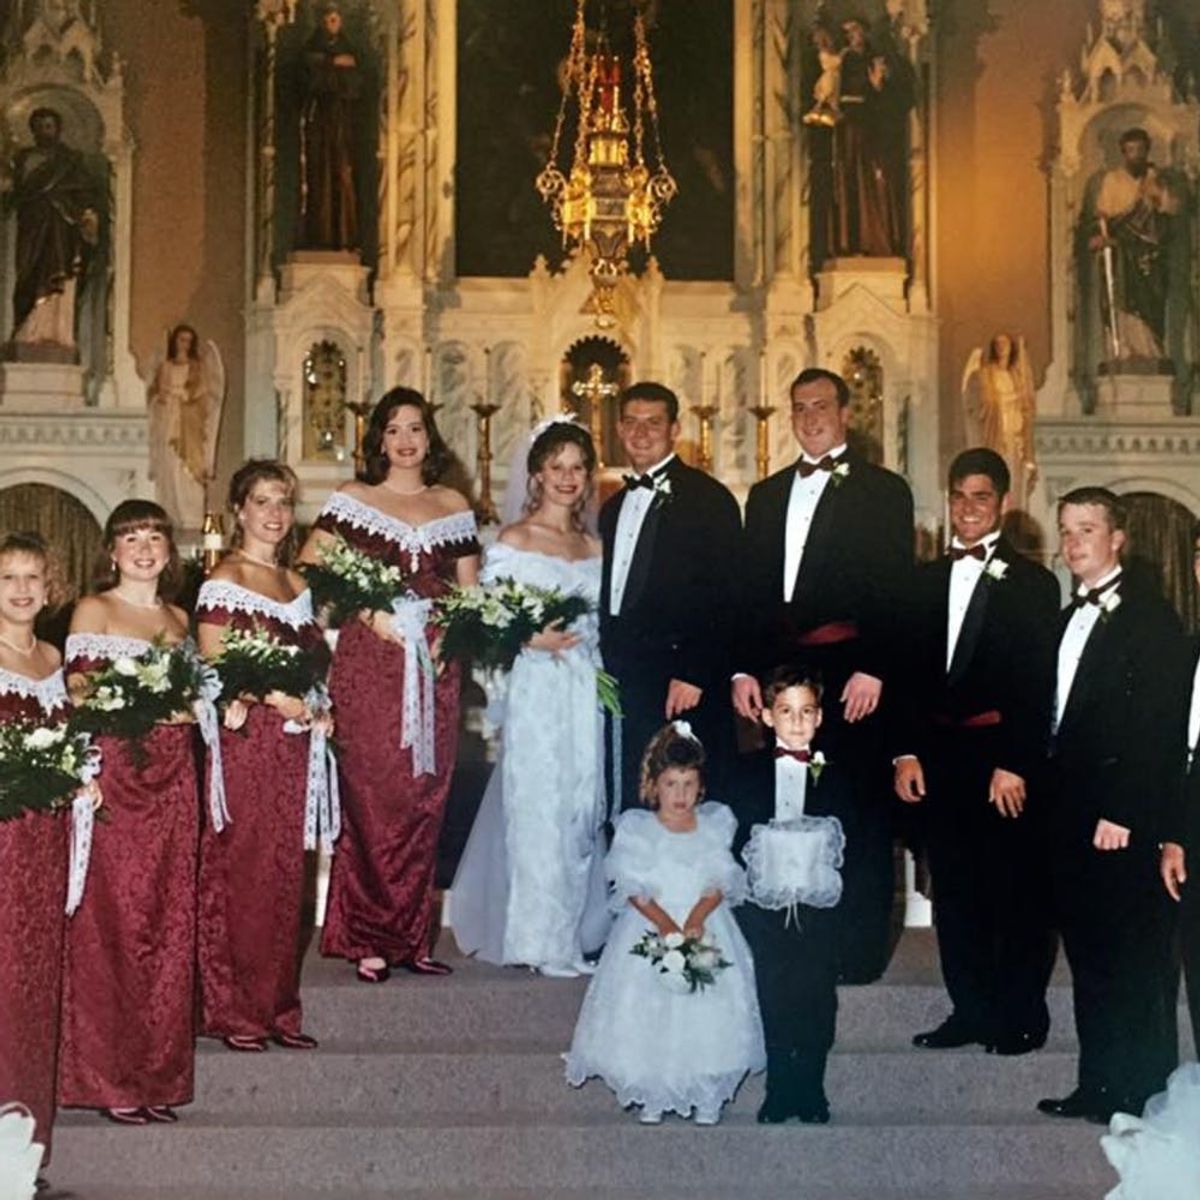 This Woman Resurrected Her Tragically ’90s Bridesmaid Dress for the Sweetest Reason